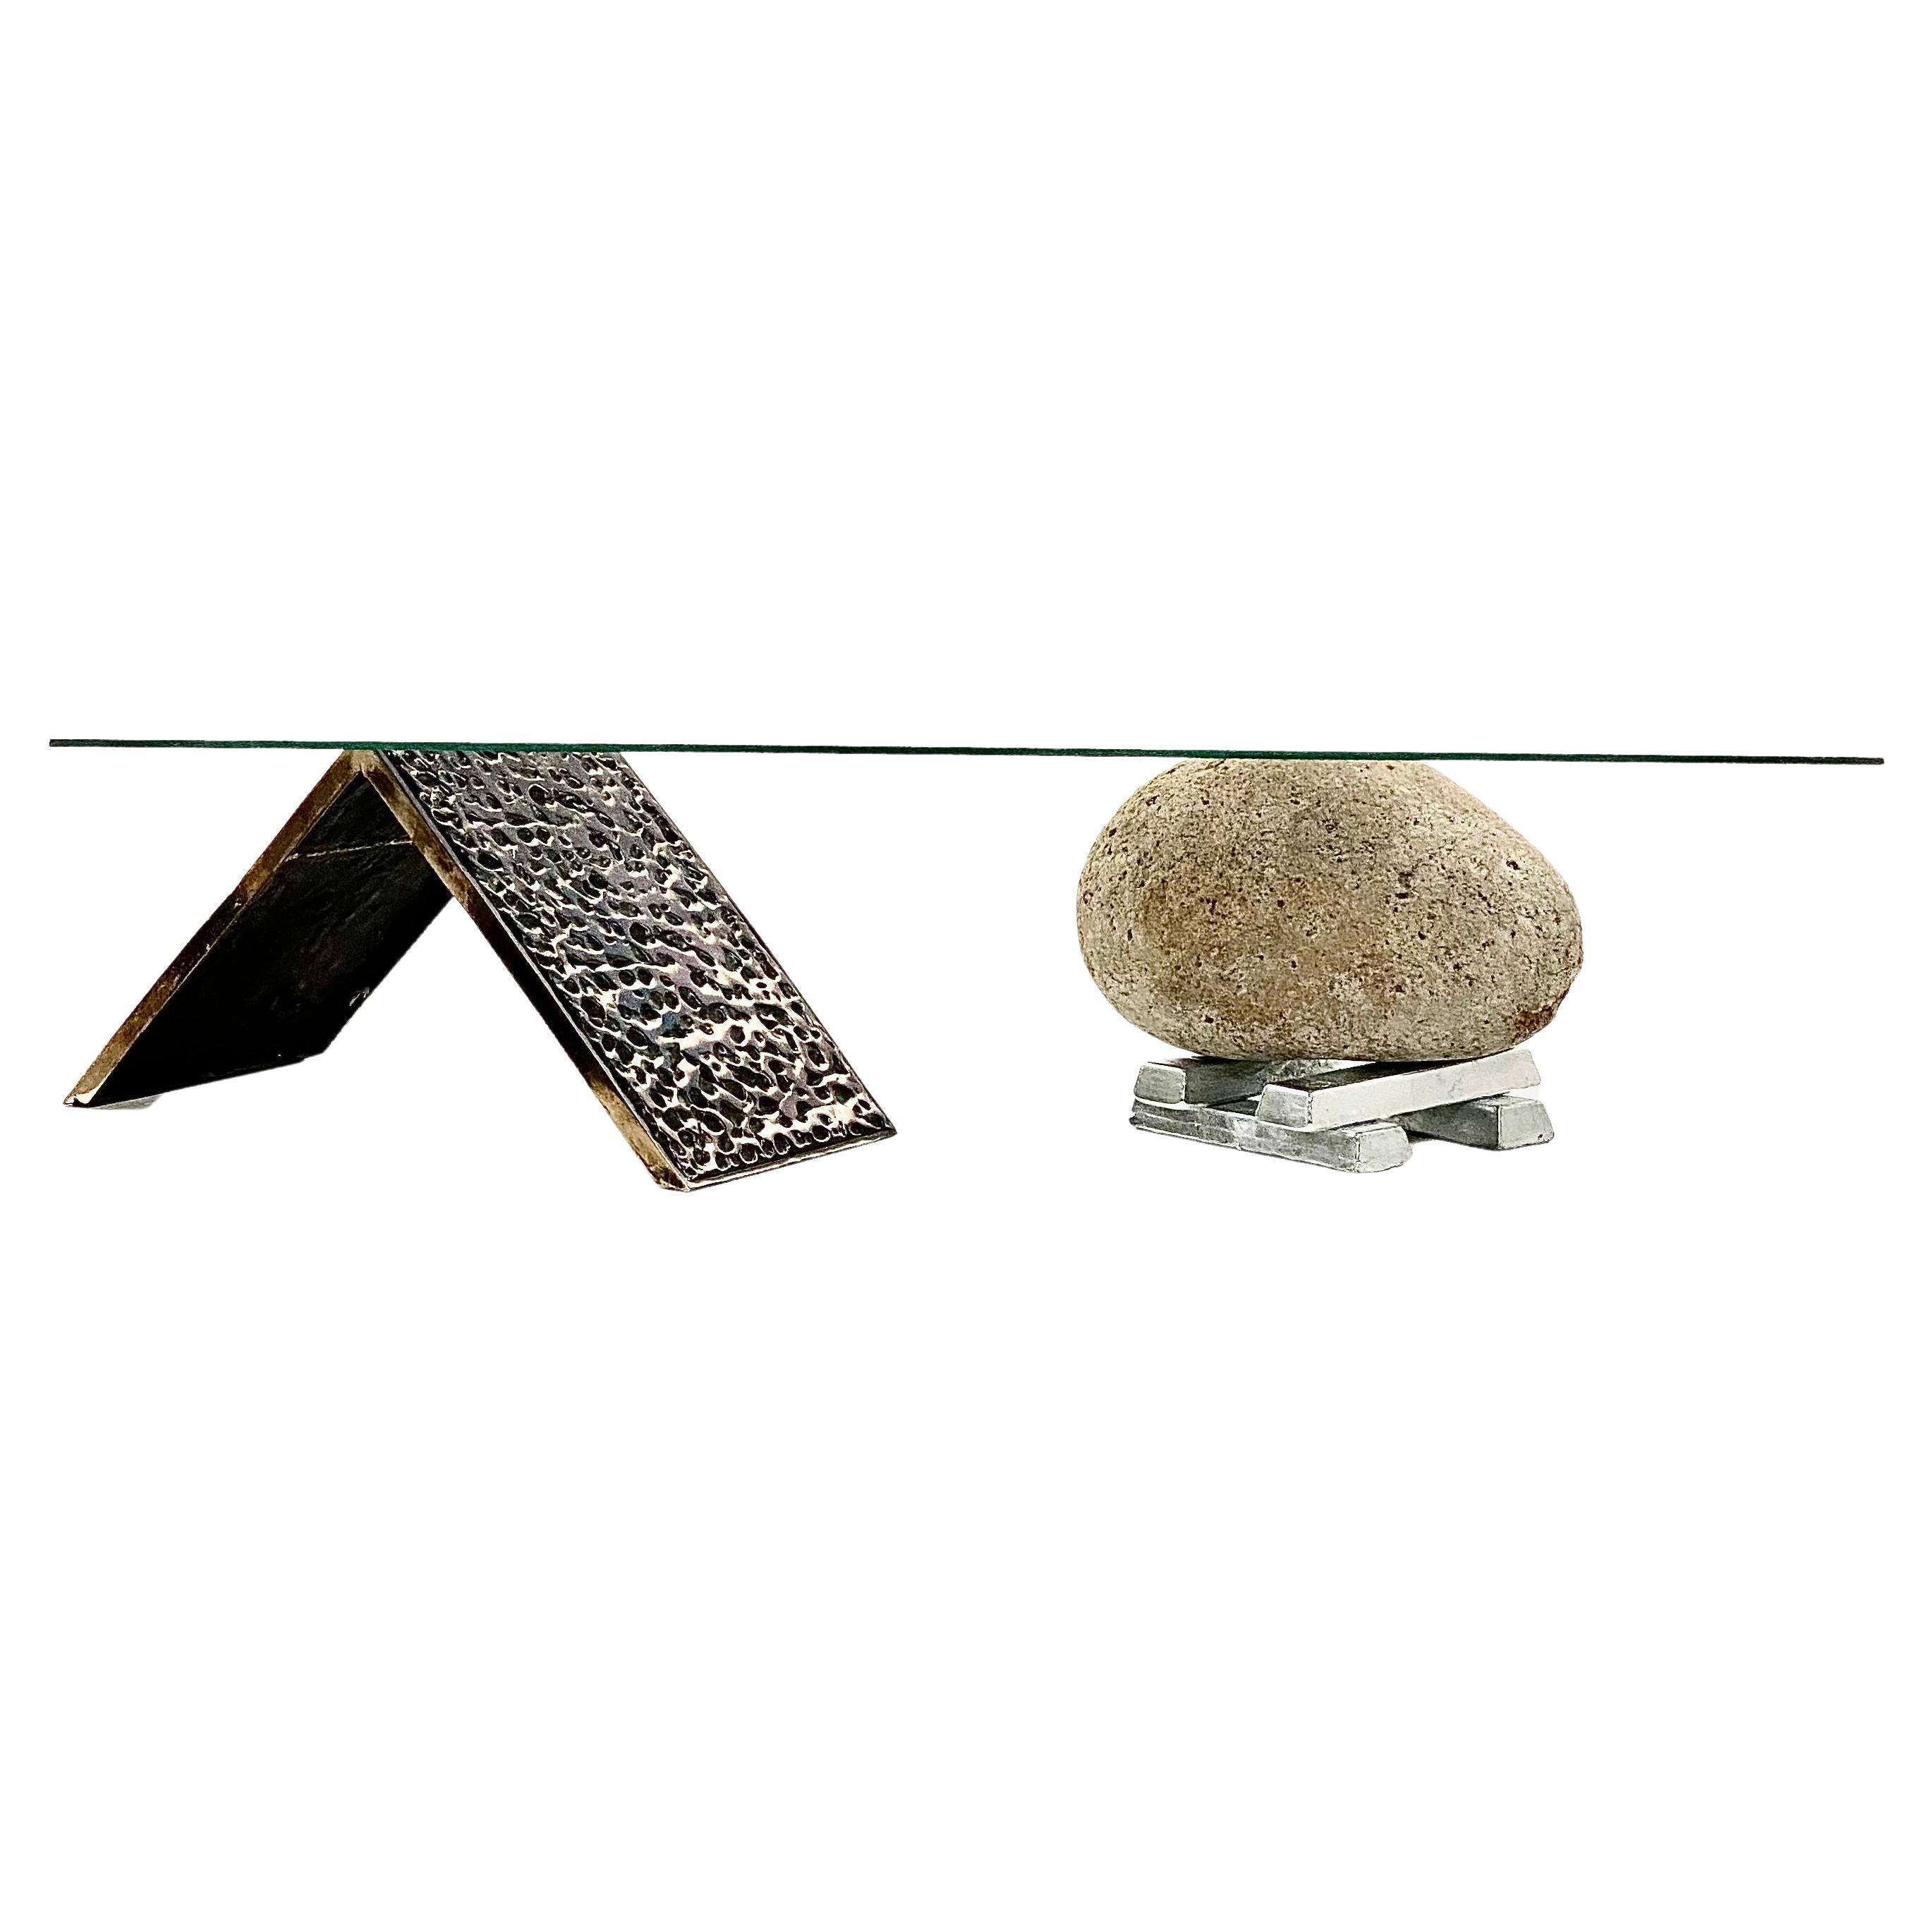 Sculptural Coffee Table in Bronze,Pewter and Stone 21st Century by Mattia Biagi